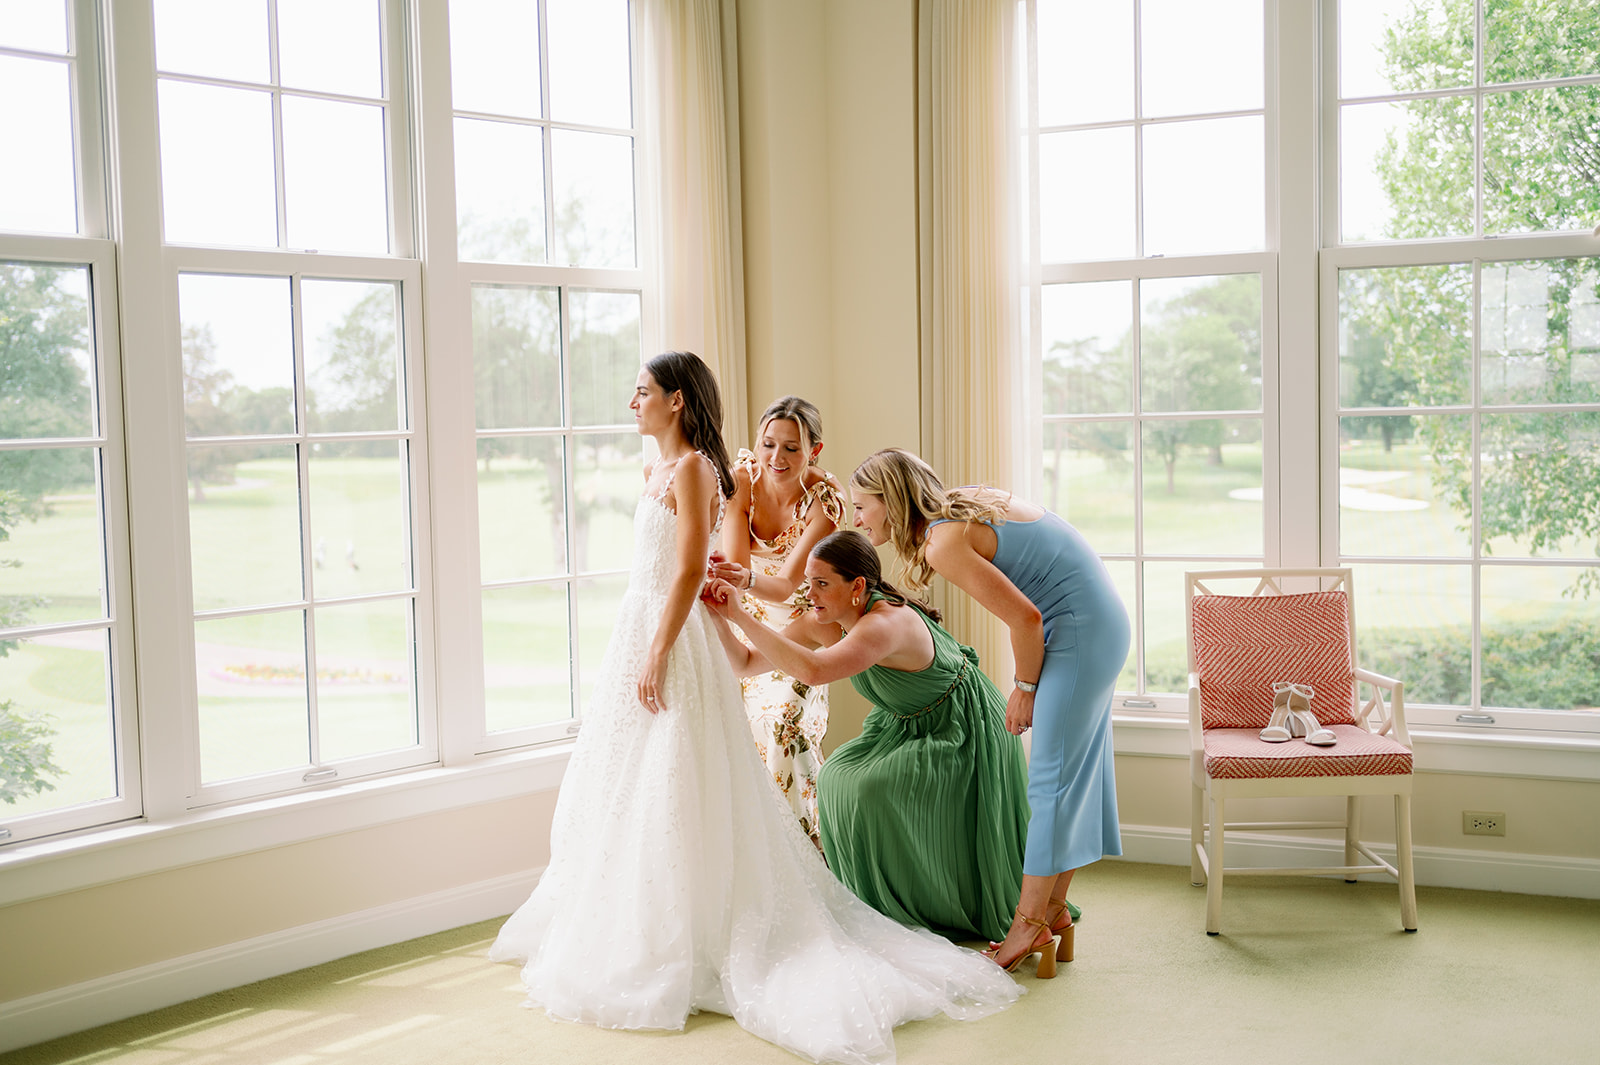 Carly's bridesmaids helping her into her wedding dress.